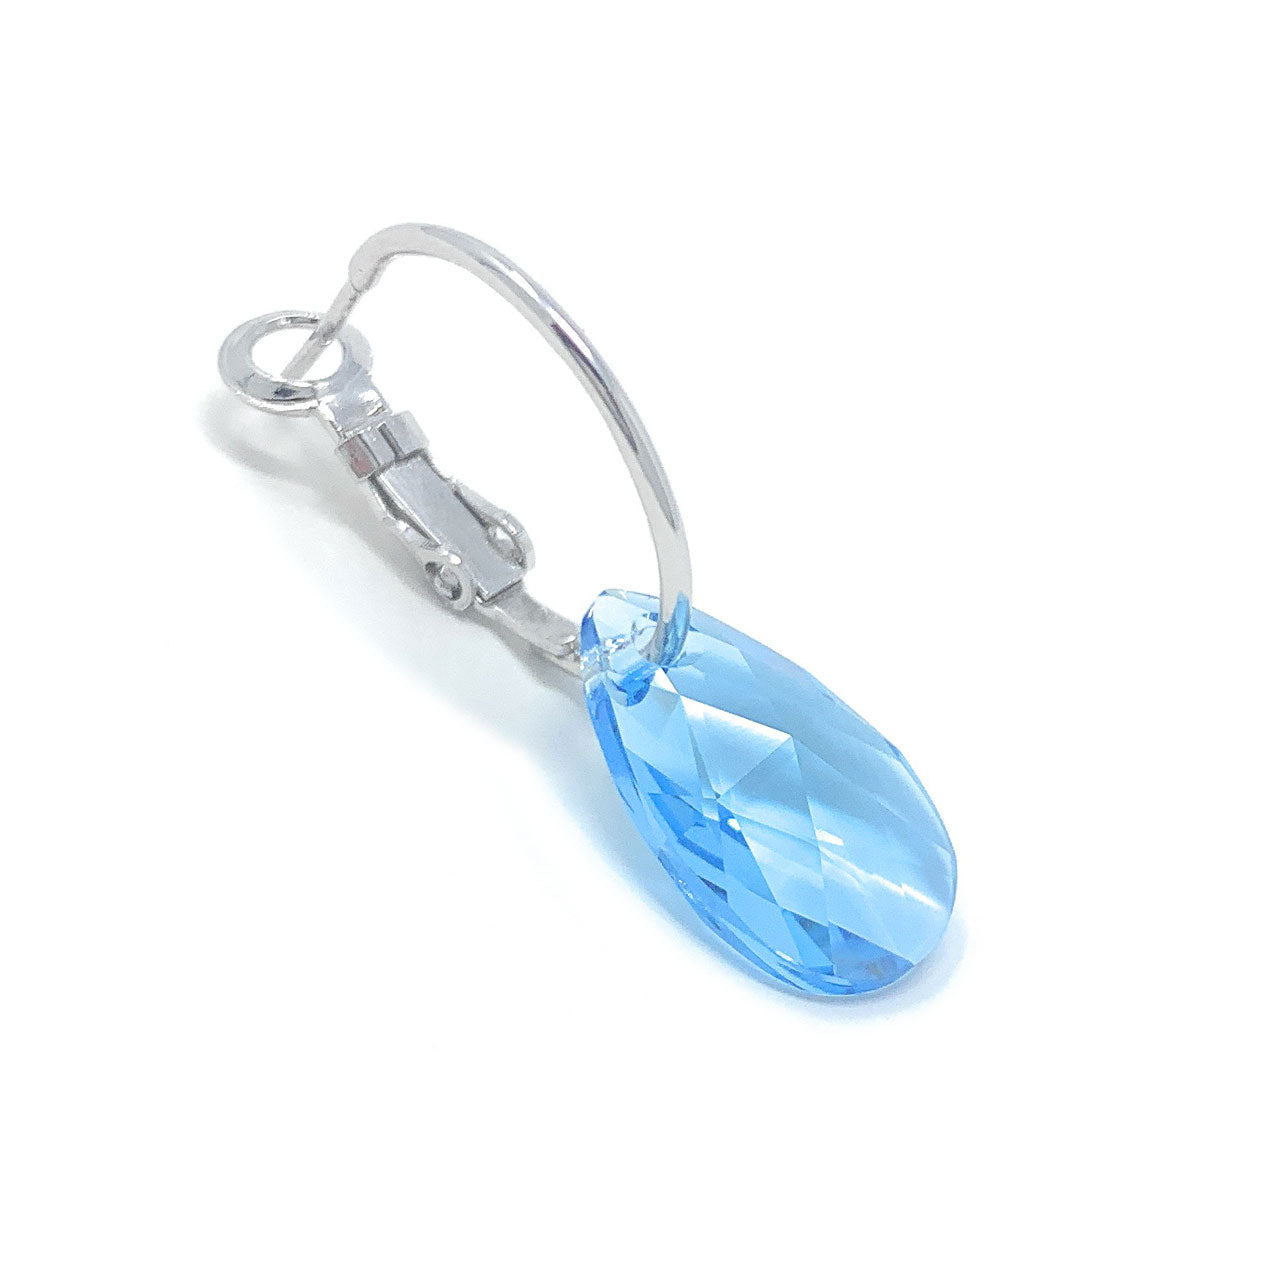 Aurora Small Drop Earrings with Blue Aquamarine Pear Crystals from Swarovski Silver Toned Rhodium Plated - Ed Heart